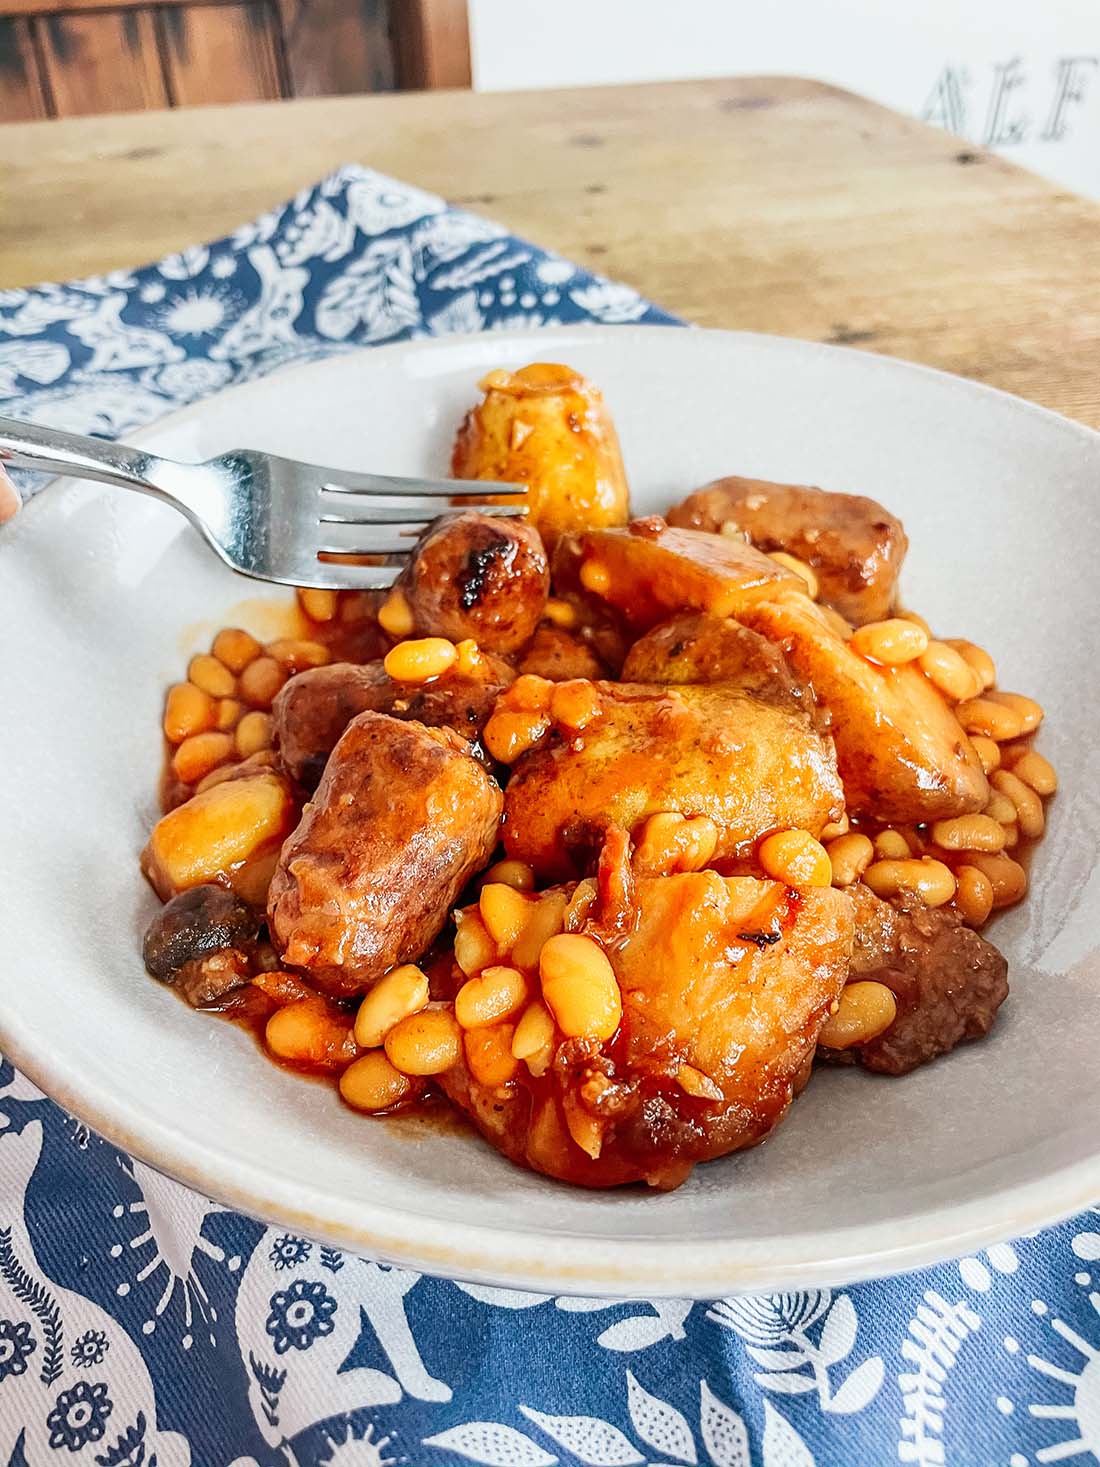 Sausage and bacon casserole with beans